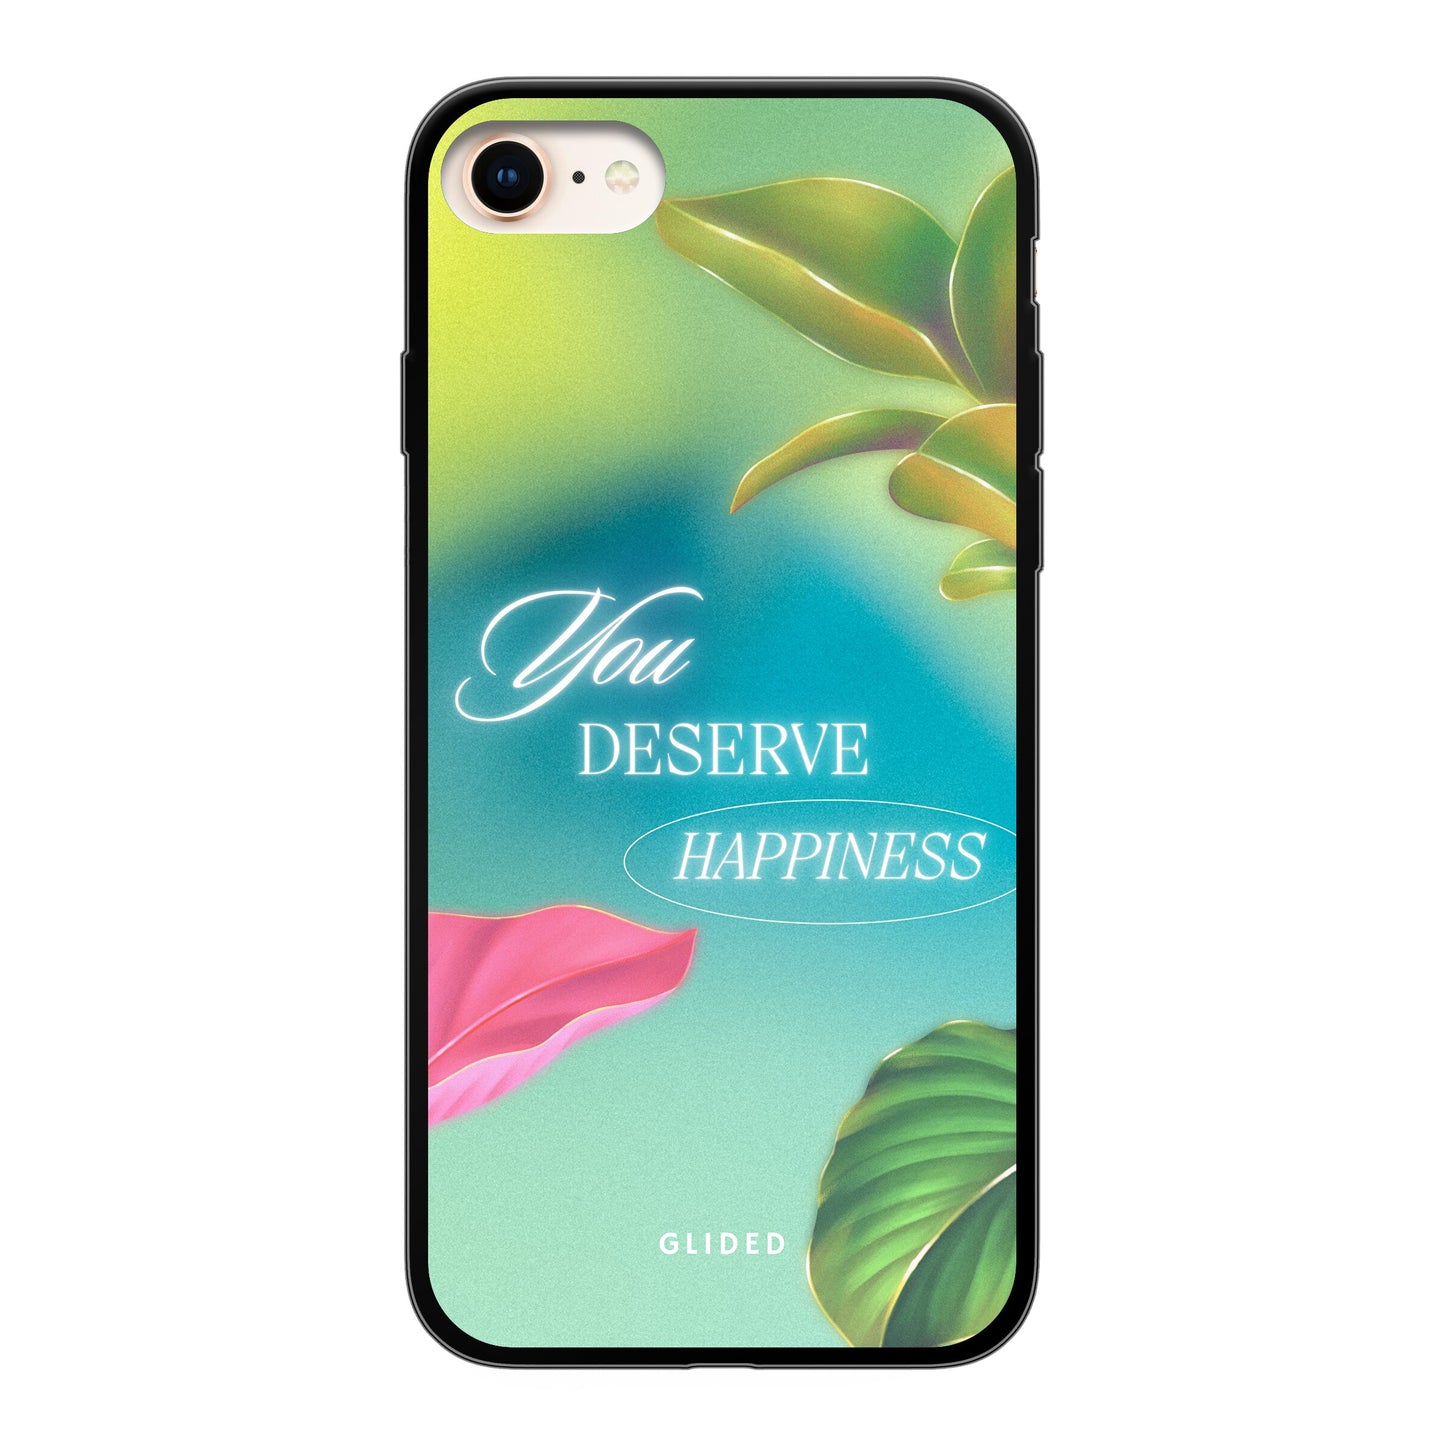 Happiness - iPhone 7 - Soft case